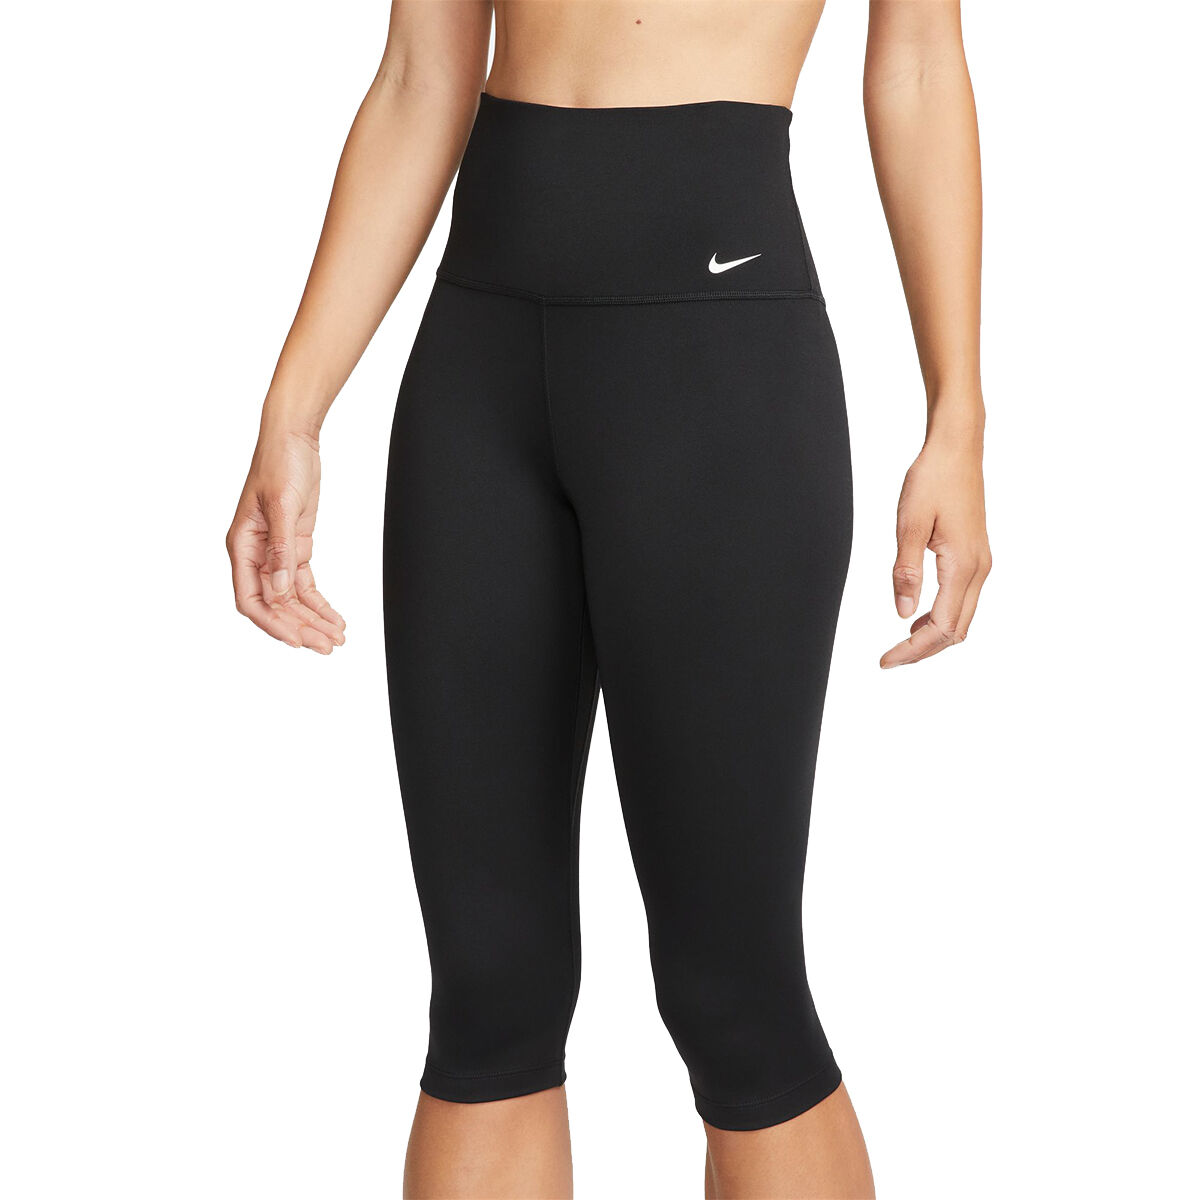 Nike Legendary Sculpt Tight Women's Training Pants, black/black, Small :  Amazon.in: Clothing & Accessories